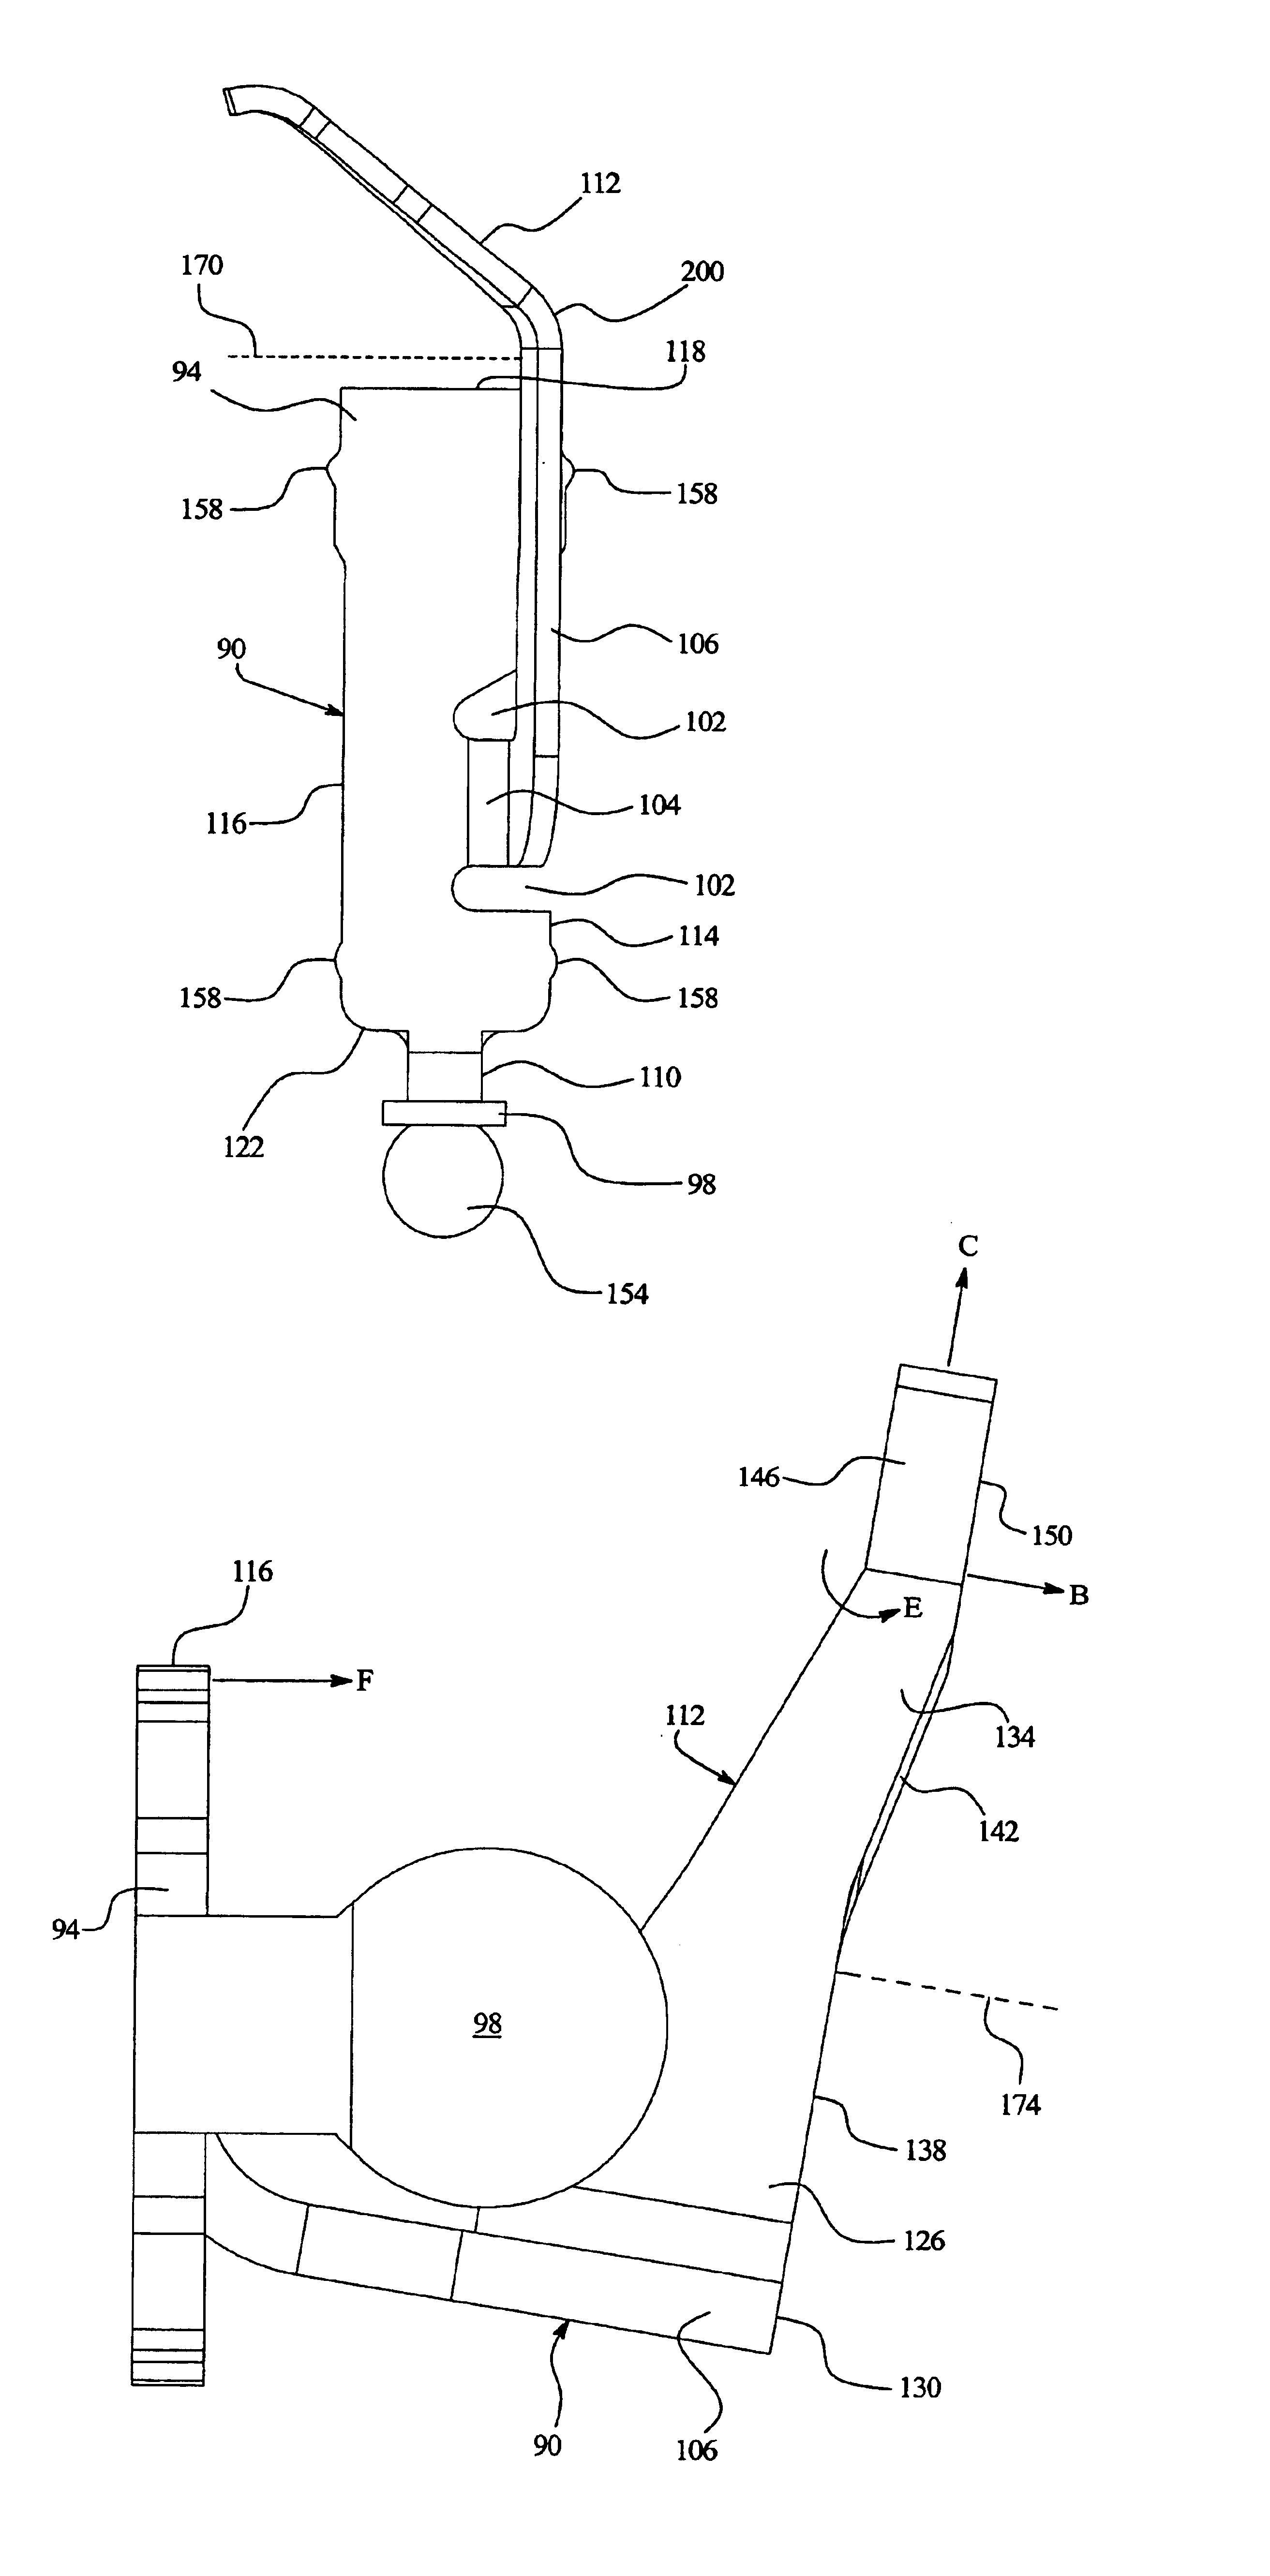 Contact for land grid array socket